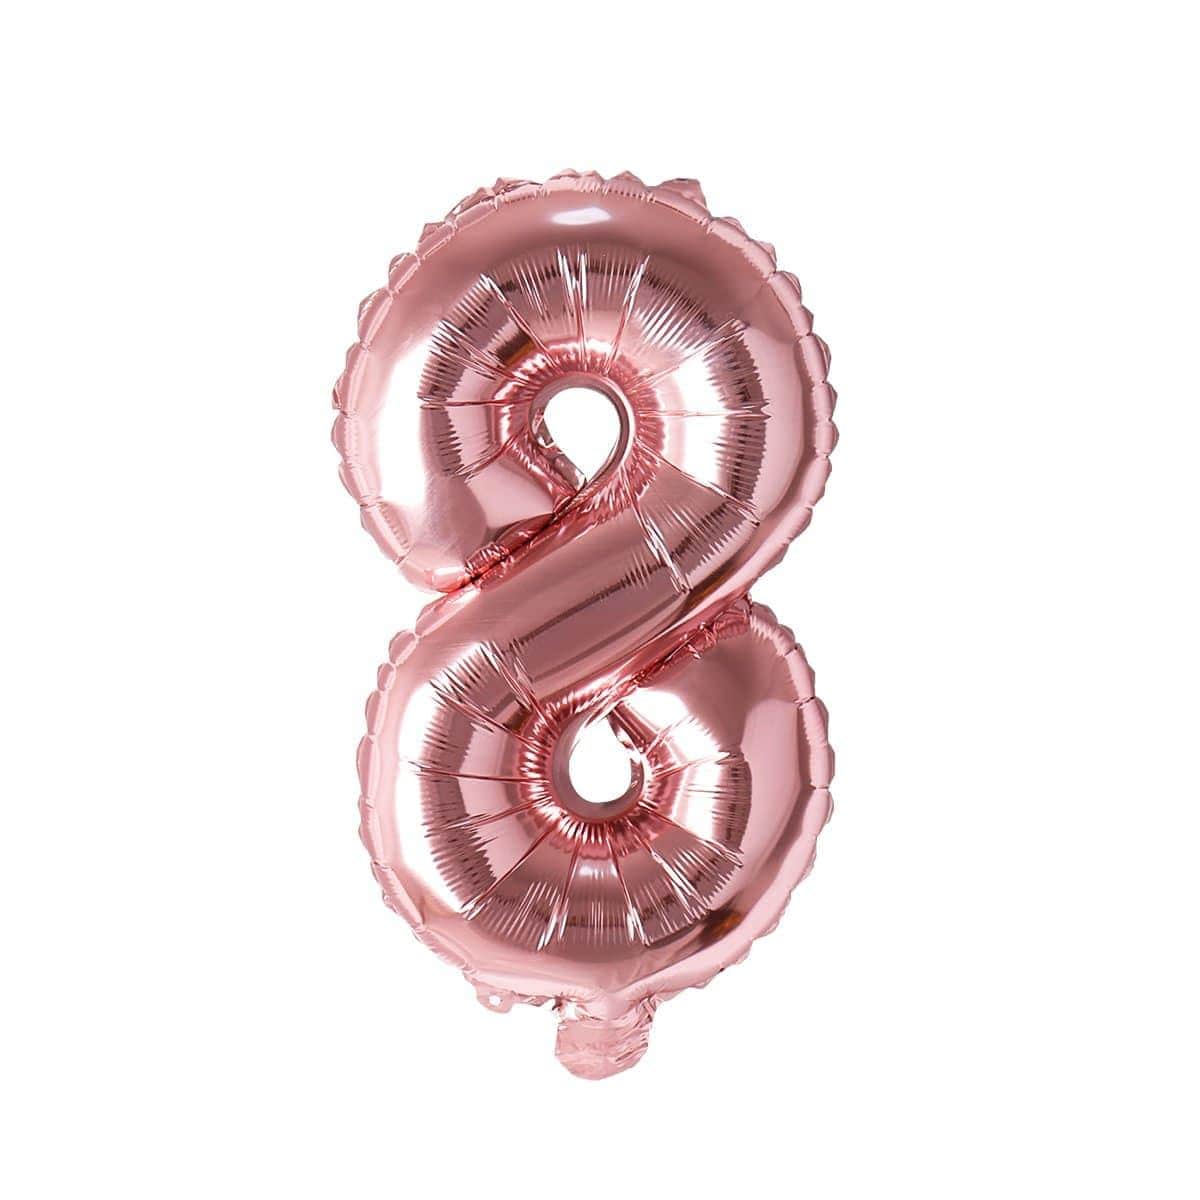 Buy Balloons Rose Gold Number 8 Foil Balloon, 16 Inches sold at Party Expert